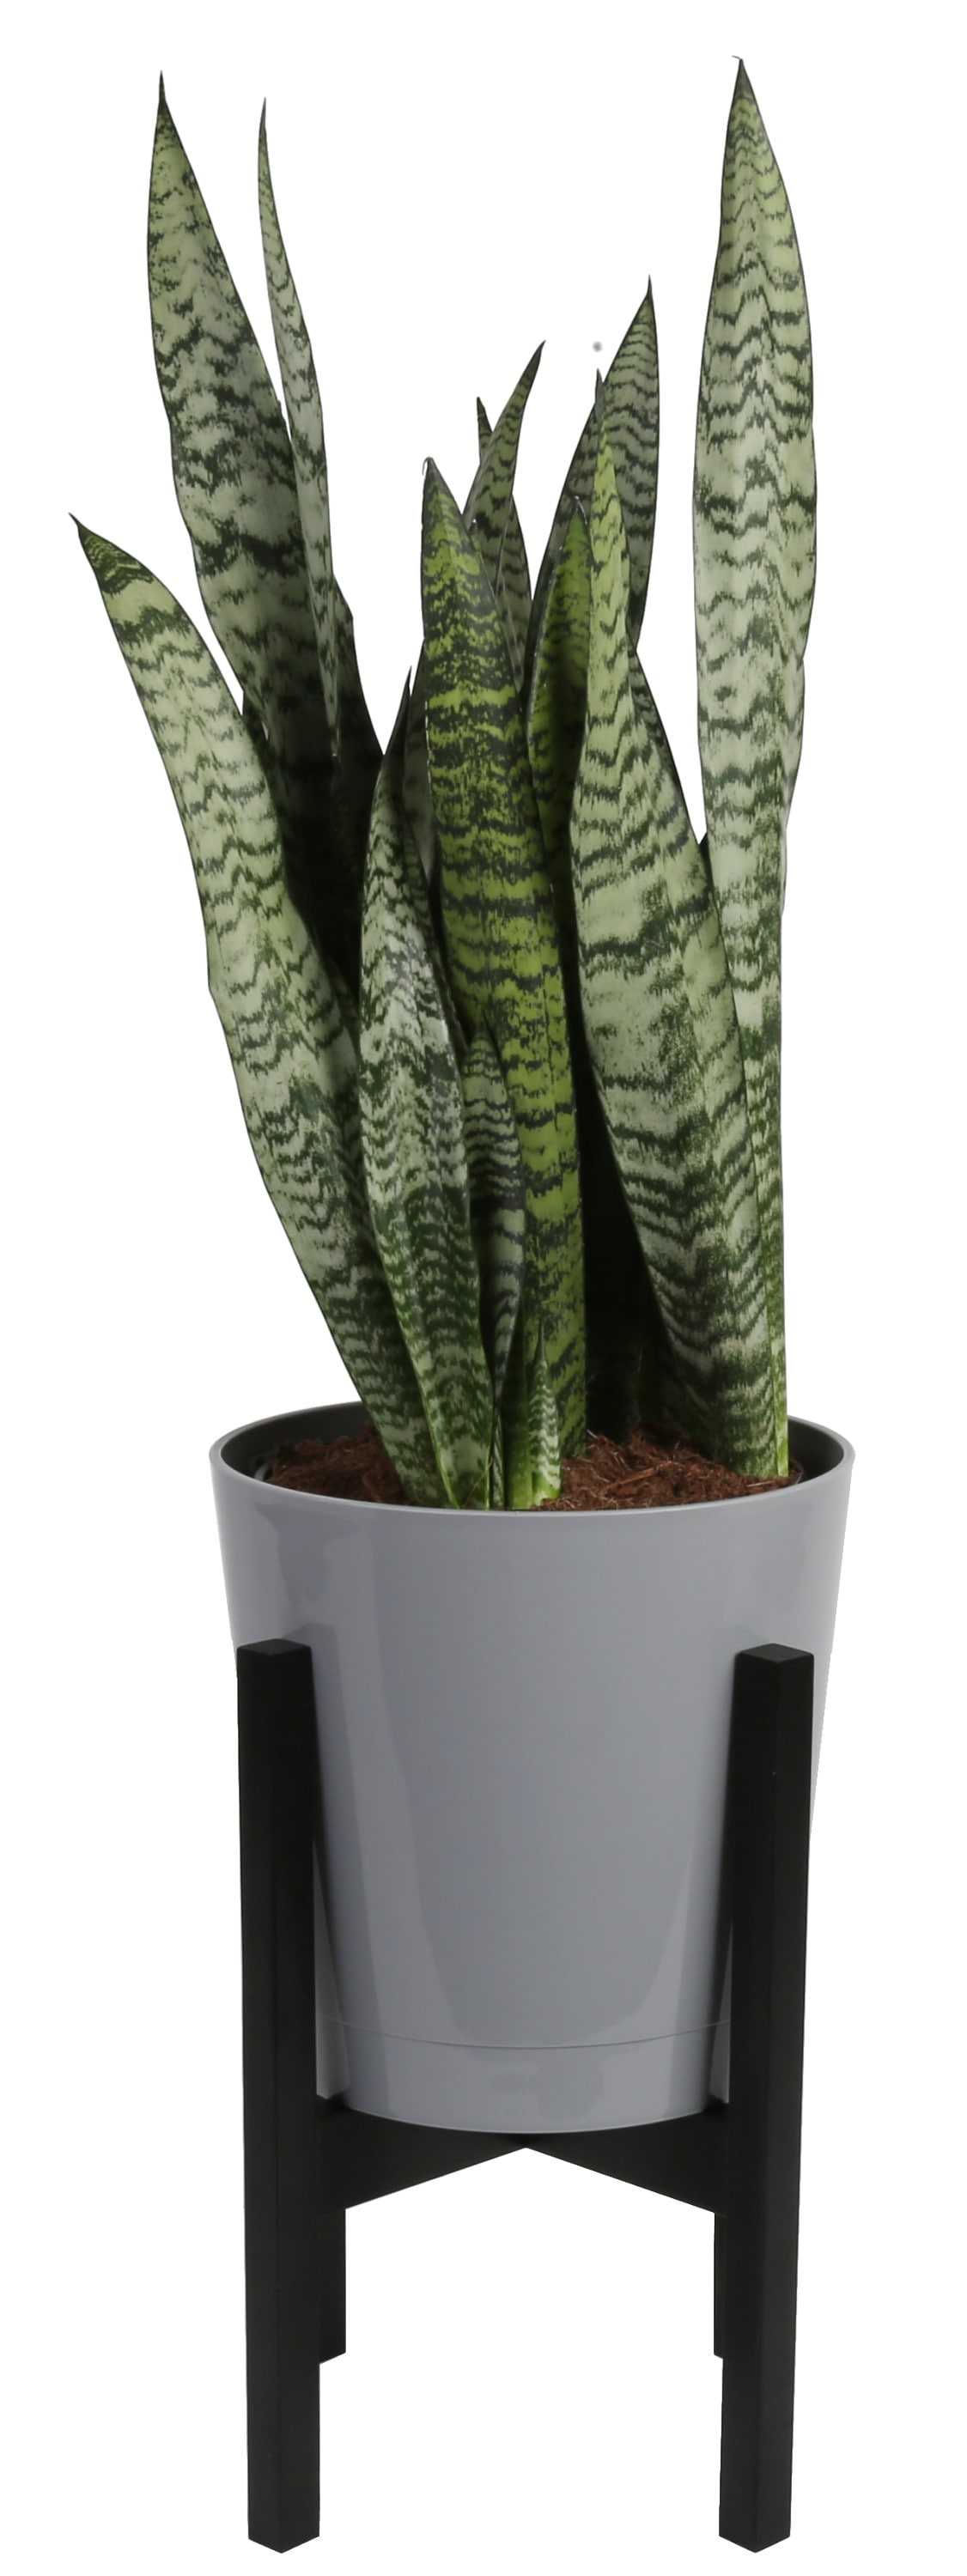 Costa Farms Sansevieria Snake Plant House Plant in 10-in Pot | L-SAN-S-GMC-01-LW